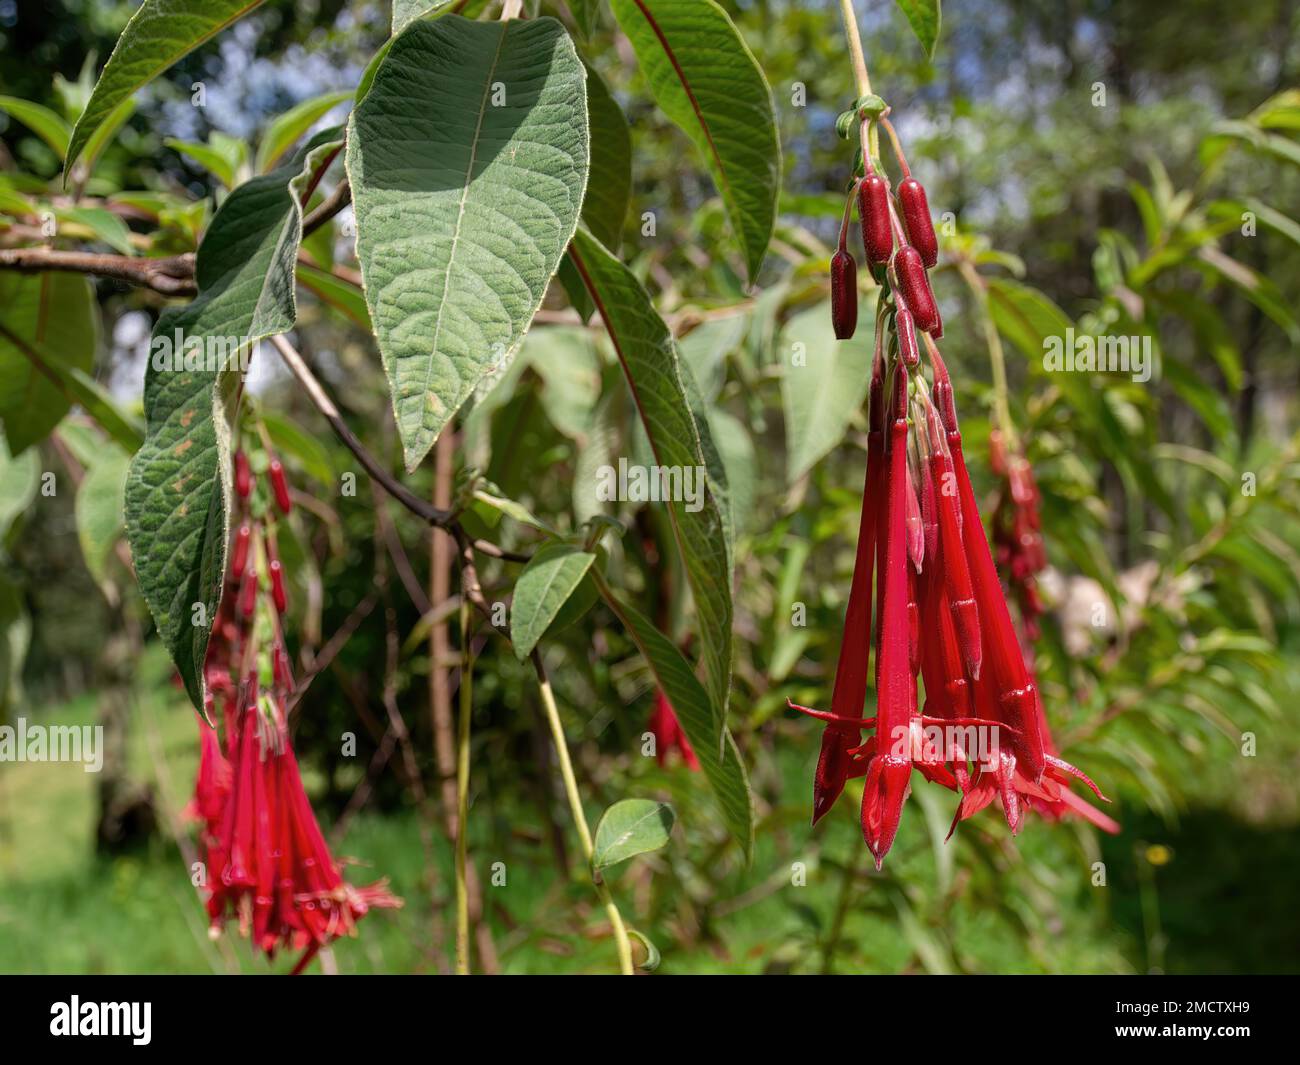 The hanging flowers, and some fruits, of the exotic fuchsia boliviana plant, captured in a forest near the town of Arcabuco in central Colombia. Stock Photo